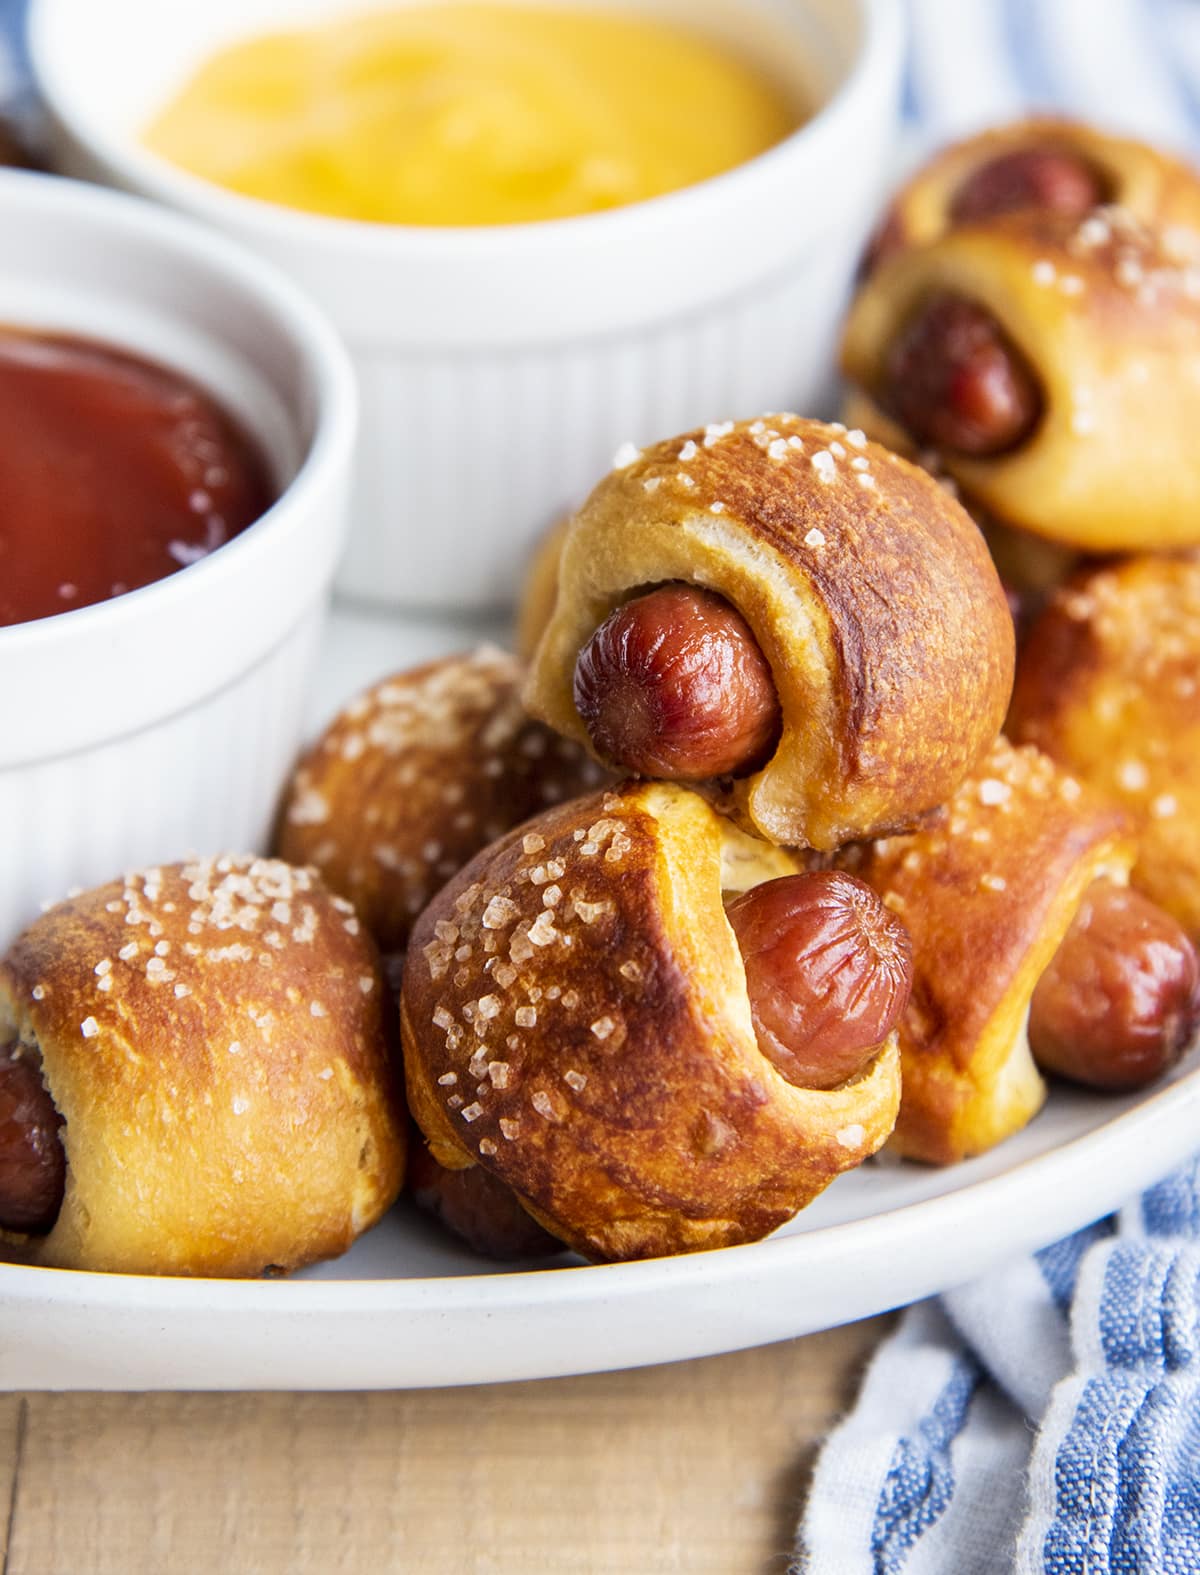 Pretzel pigs in a blanket on a plate with dipping sauces next to them.